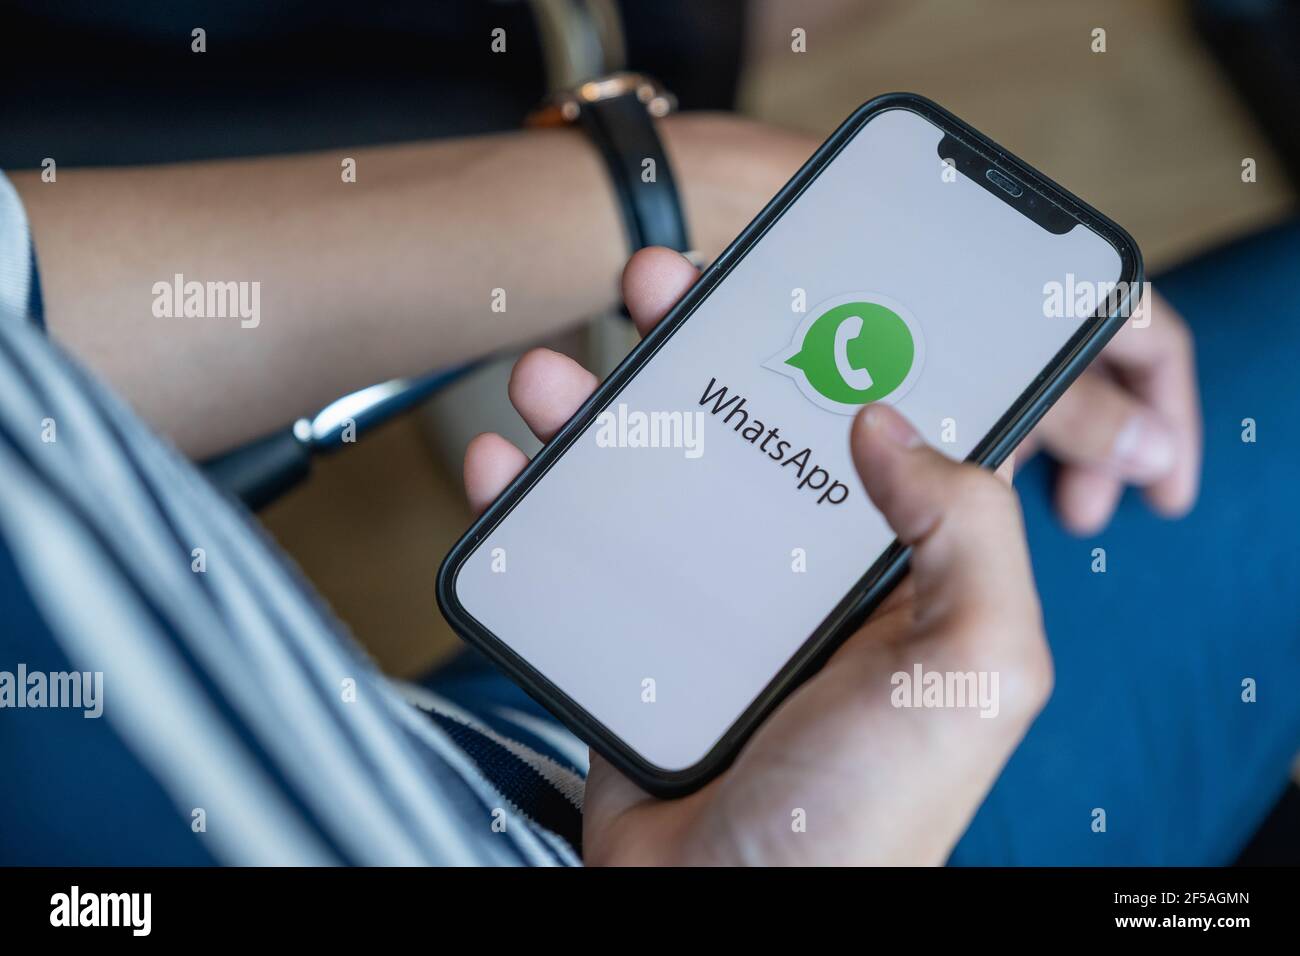 CHIANG MAI, THAILAND - FEB 1, 2032 : Man holding iPhone with Whatsapp logo on Cellphone Screen. Stock Photo